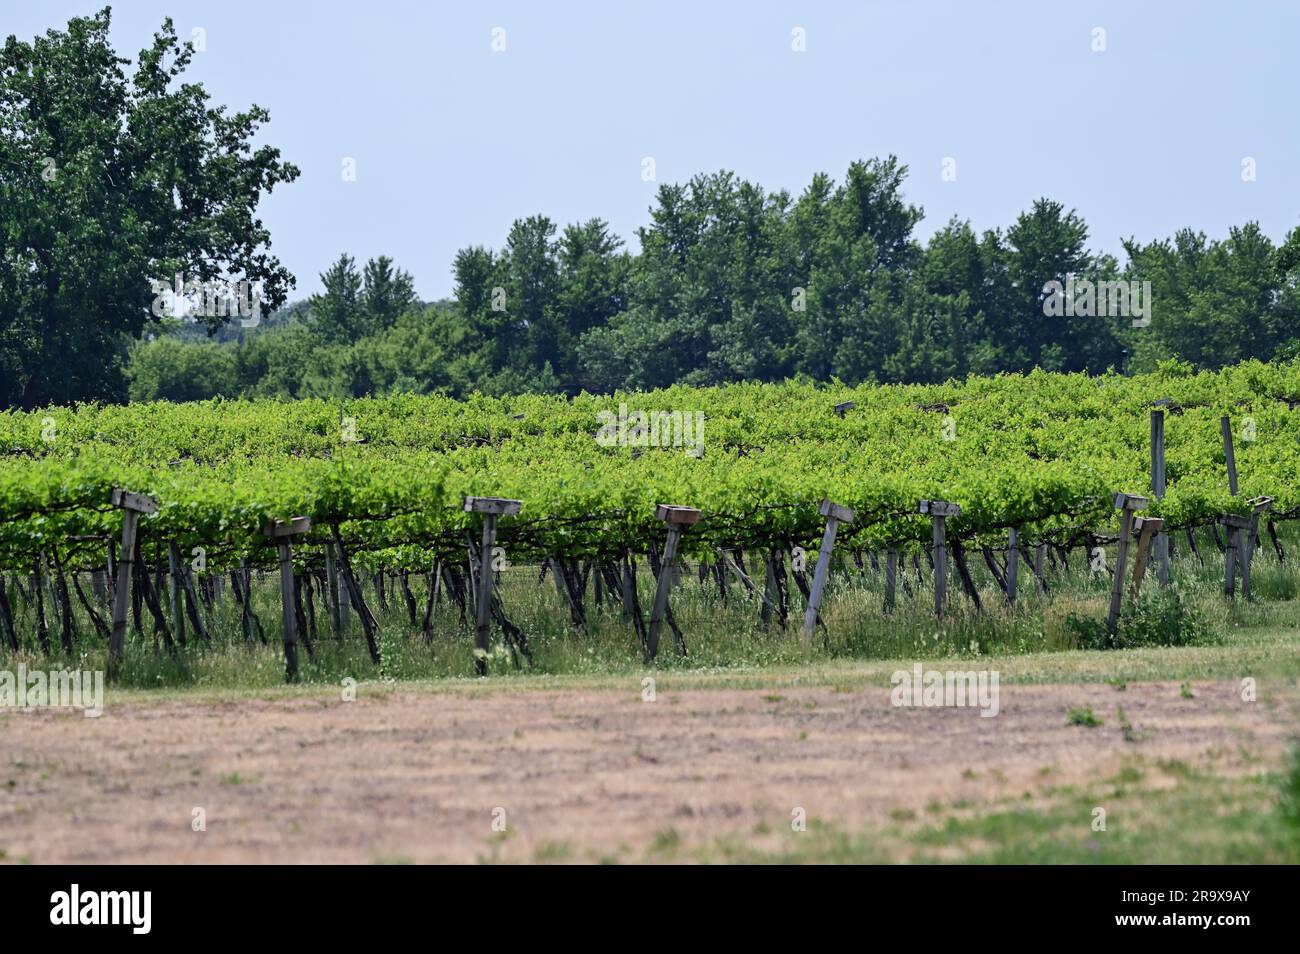 Elburn, Illinois, USA. Maturing grapes cling to vines at a winery in northeastern Illinois. Stock Photo